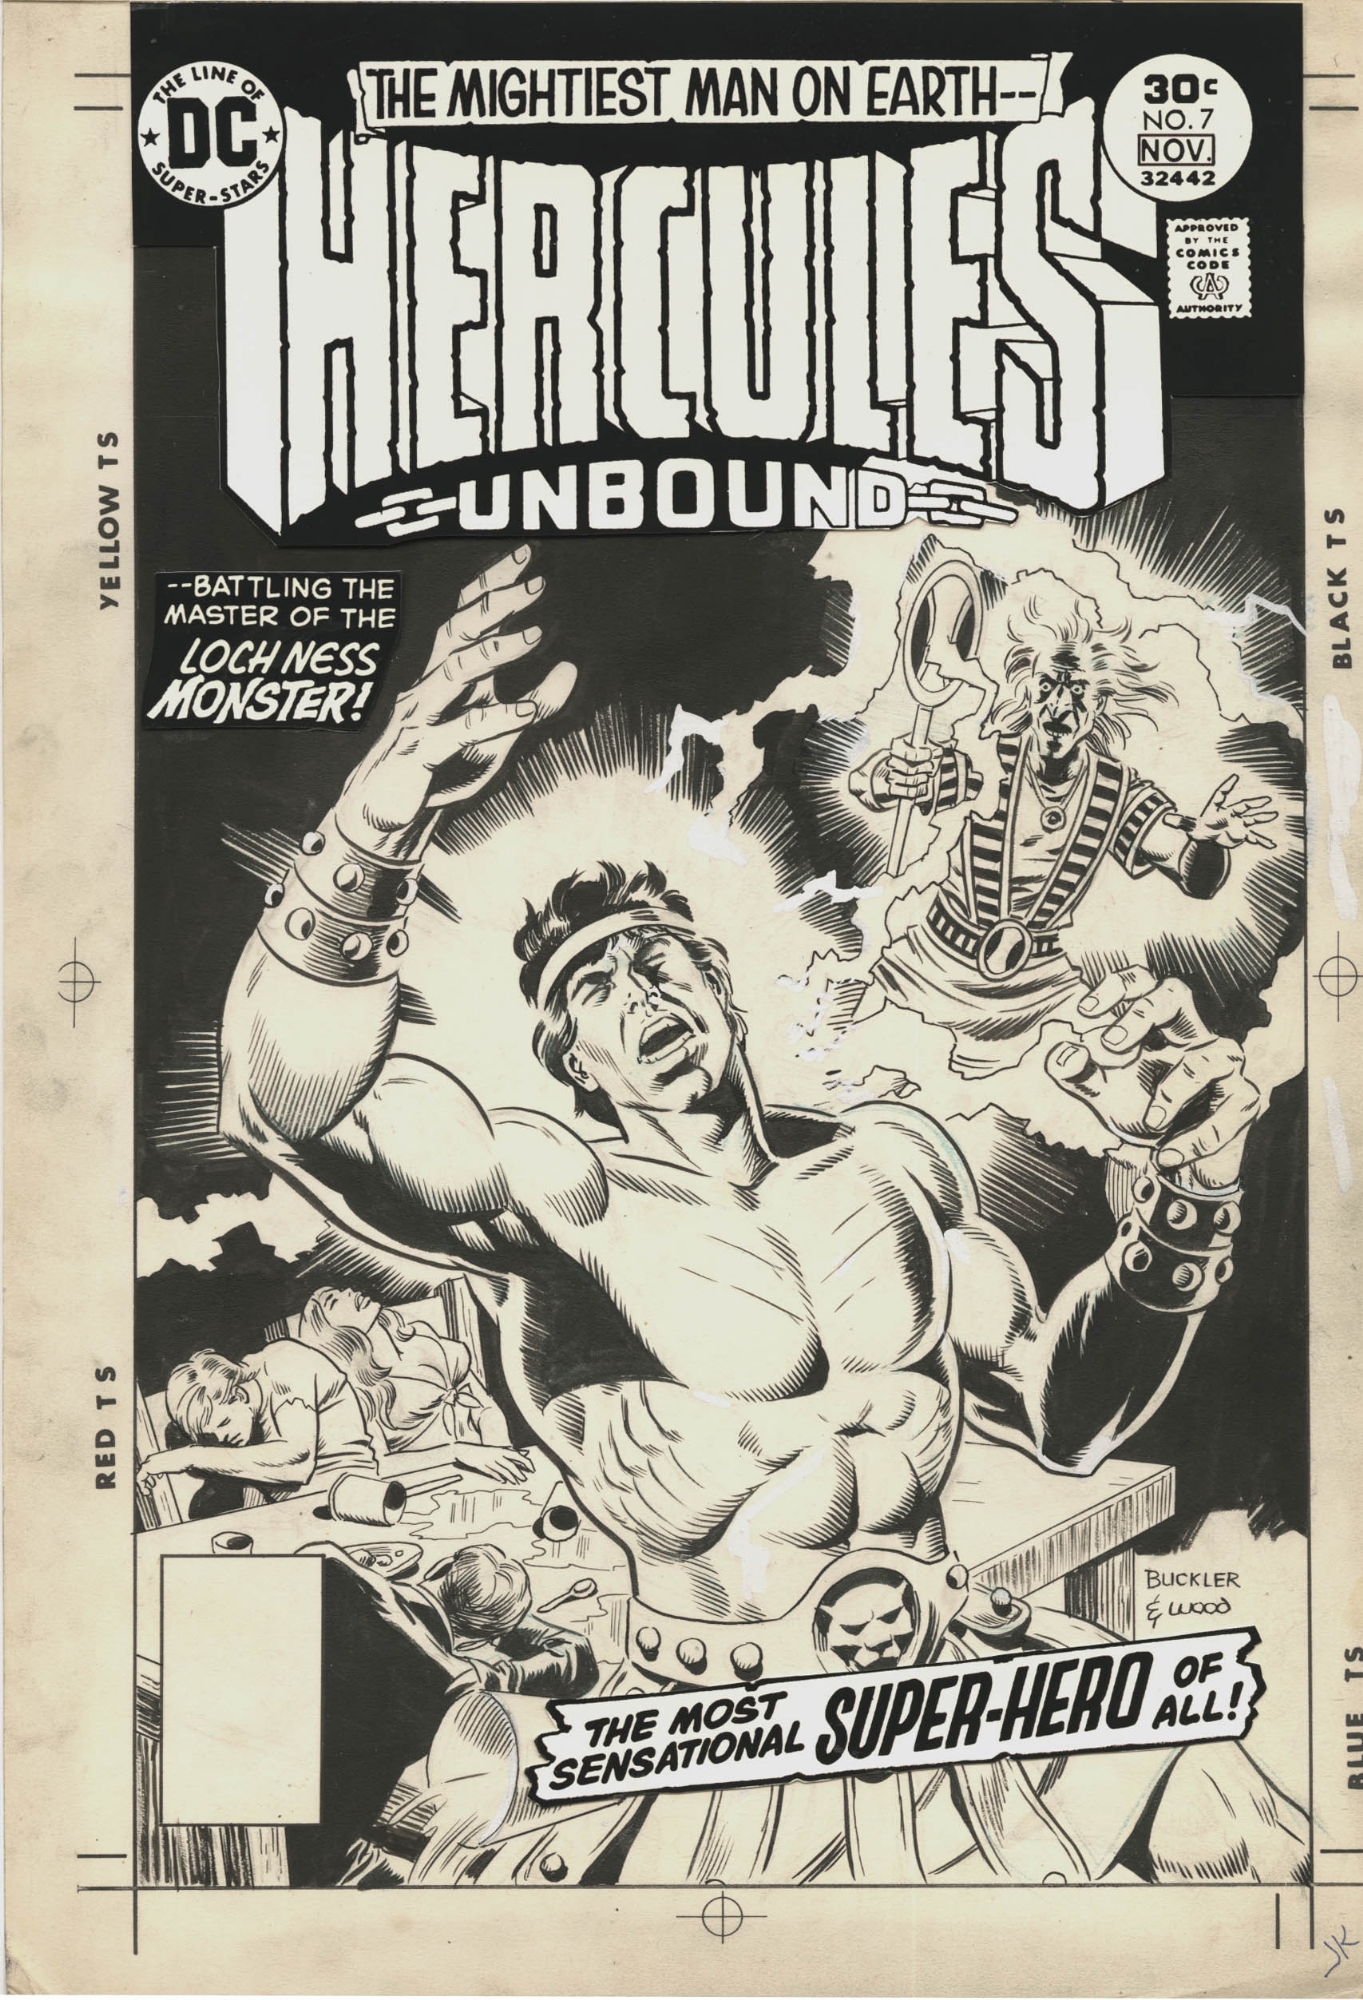 NM- Hercules Unbound 1 1975 Wally Wood art 9.2 50% off Guide! 